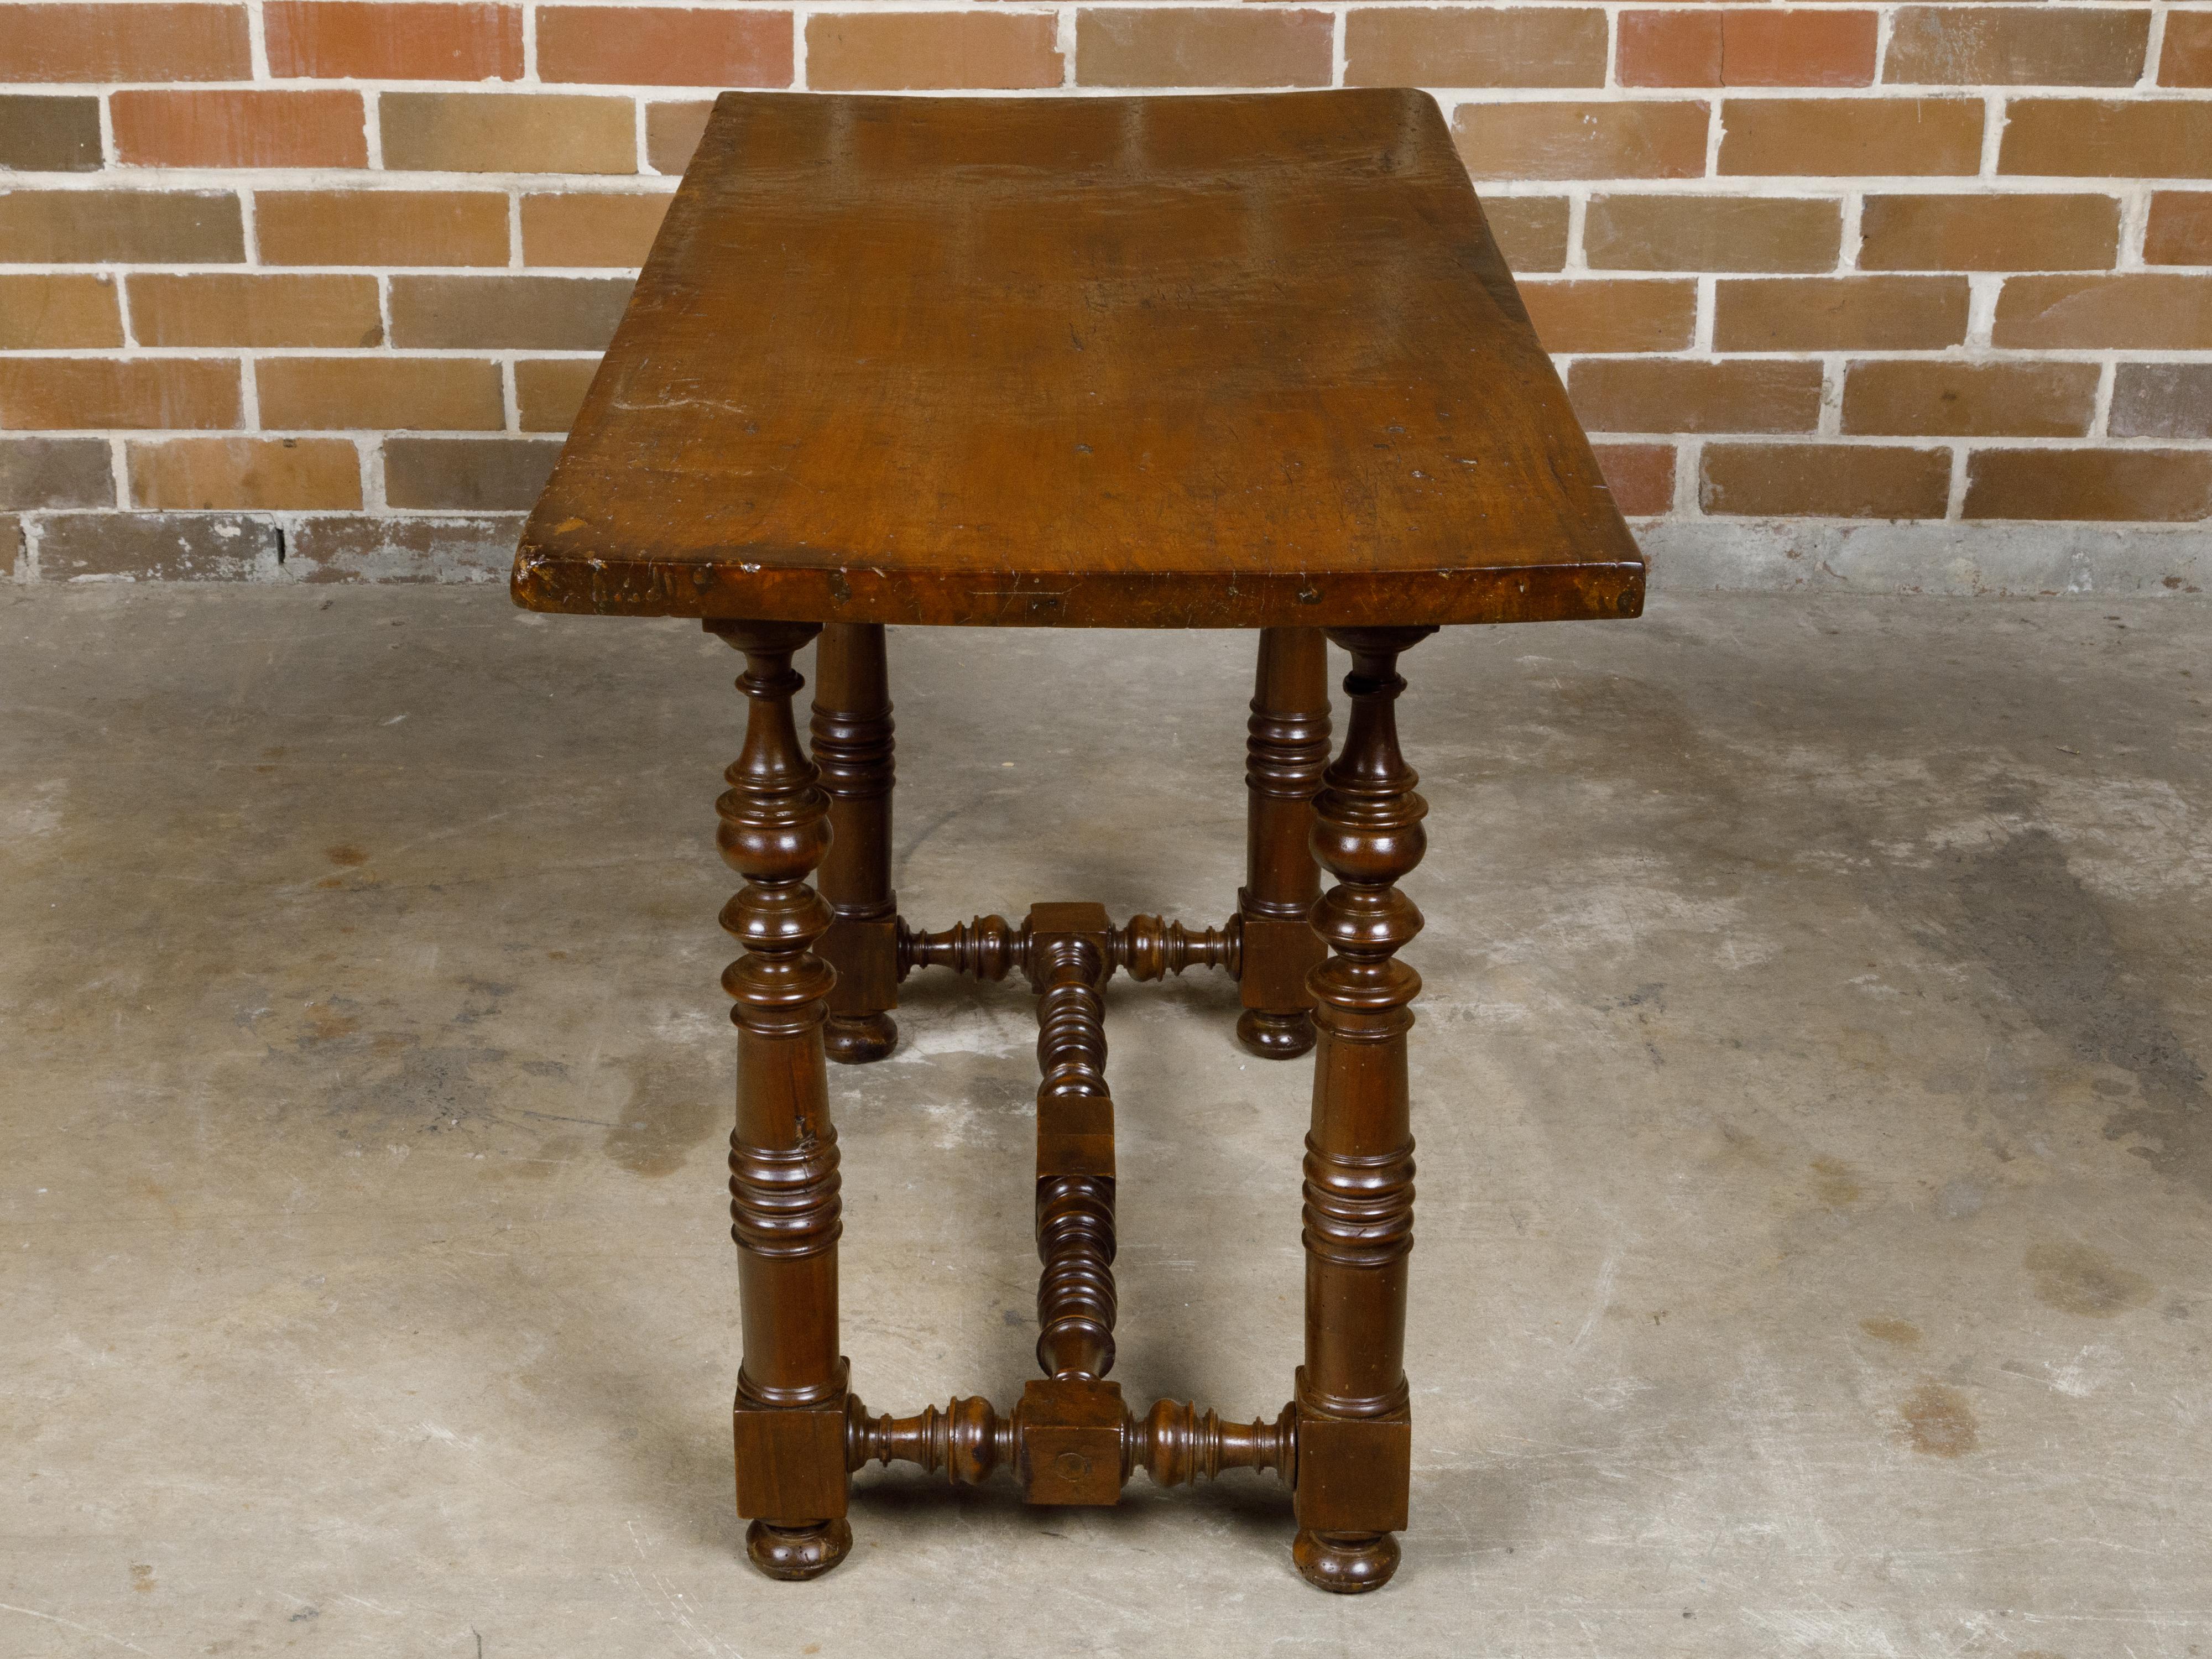 Italian 1800s Walnut Baroque Style Spool Table with H-Form Cross Stretcher For Sale 6